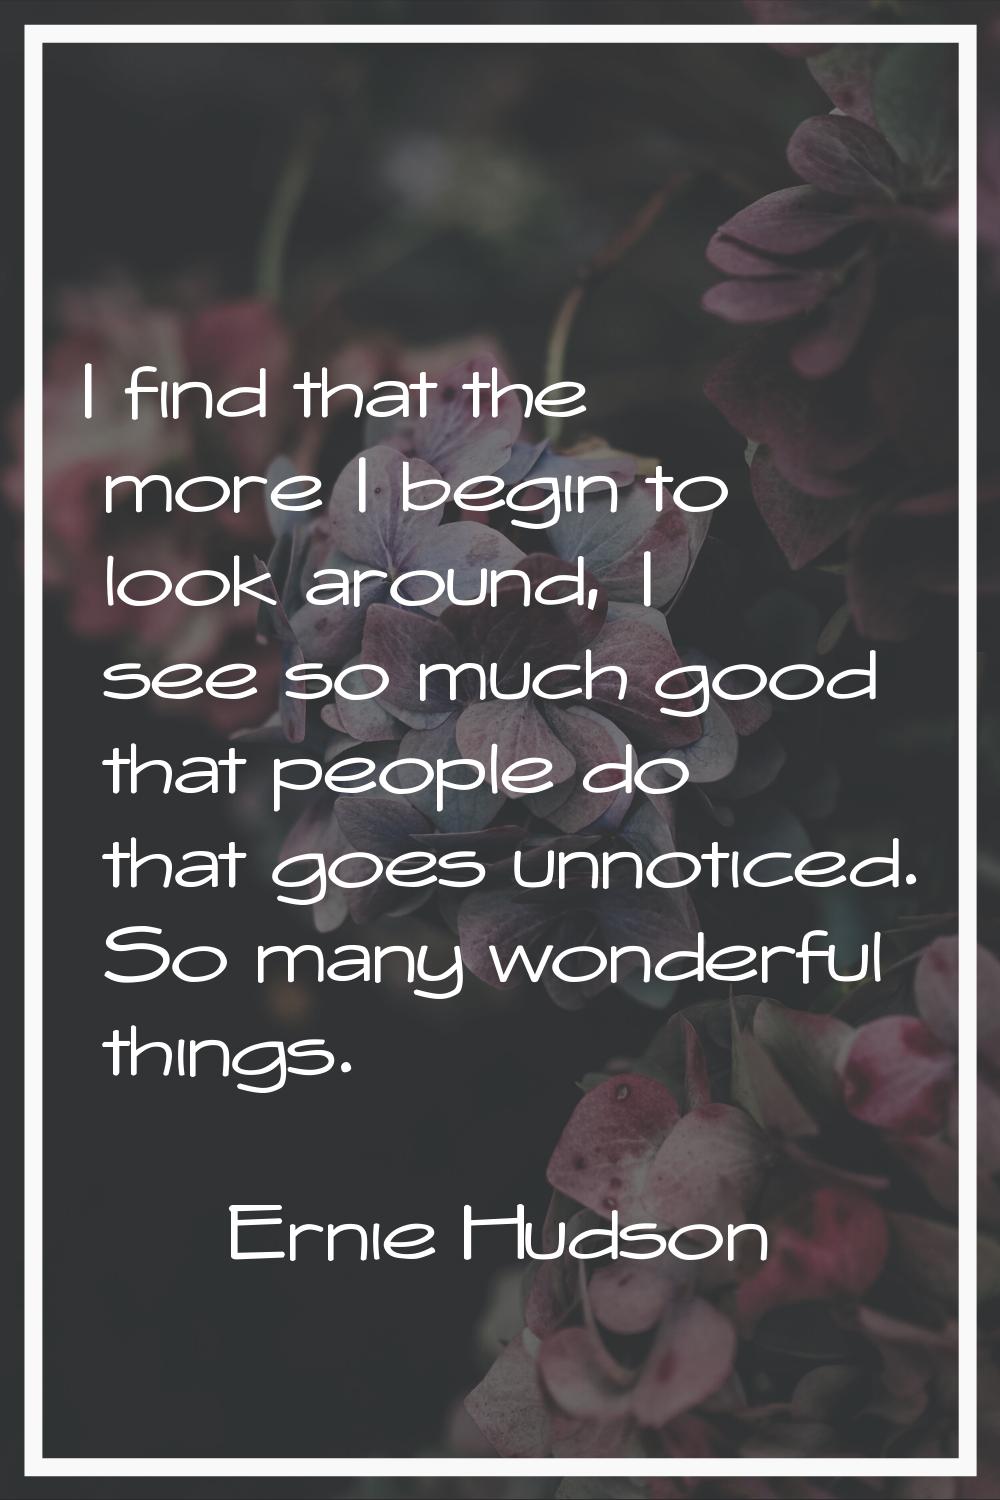 I find that the more I begin to look around, I see so much good that people do that goes unnoticed.